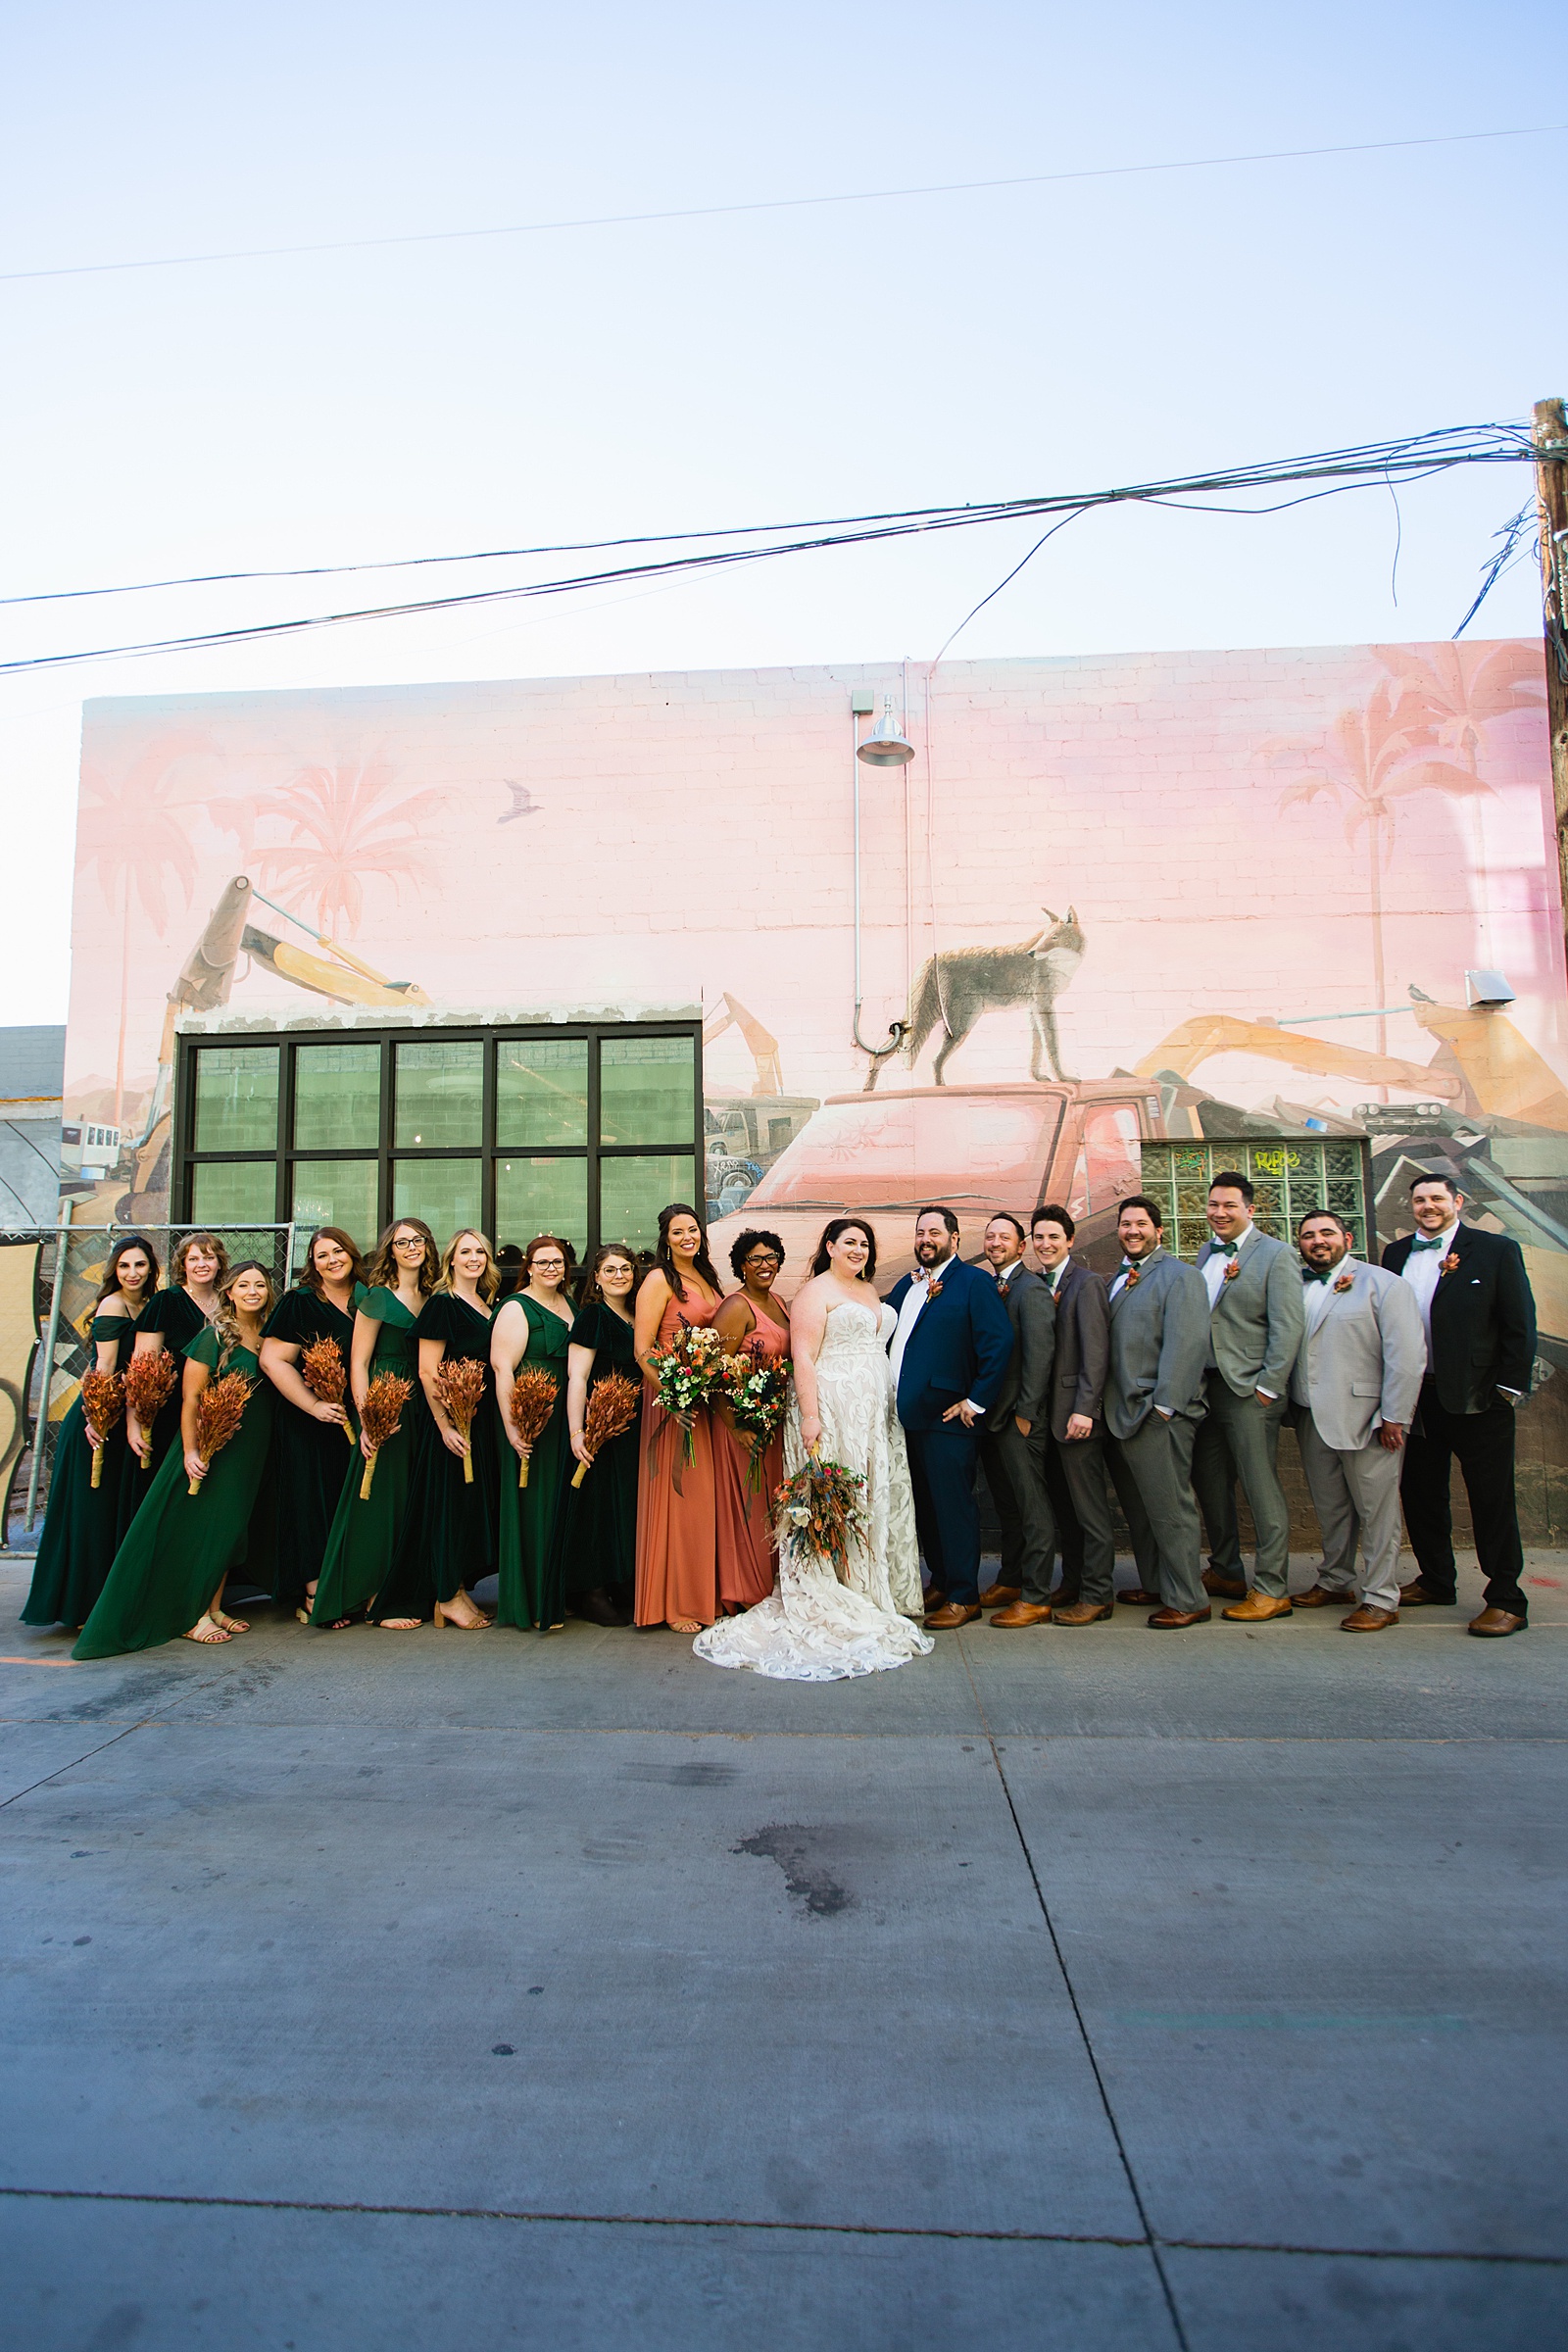 Bridal party together at a MonOrchid wedding by Arizona wedding photographer PMA Photography.